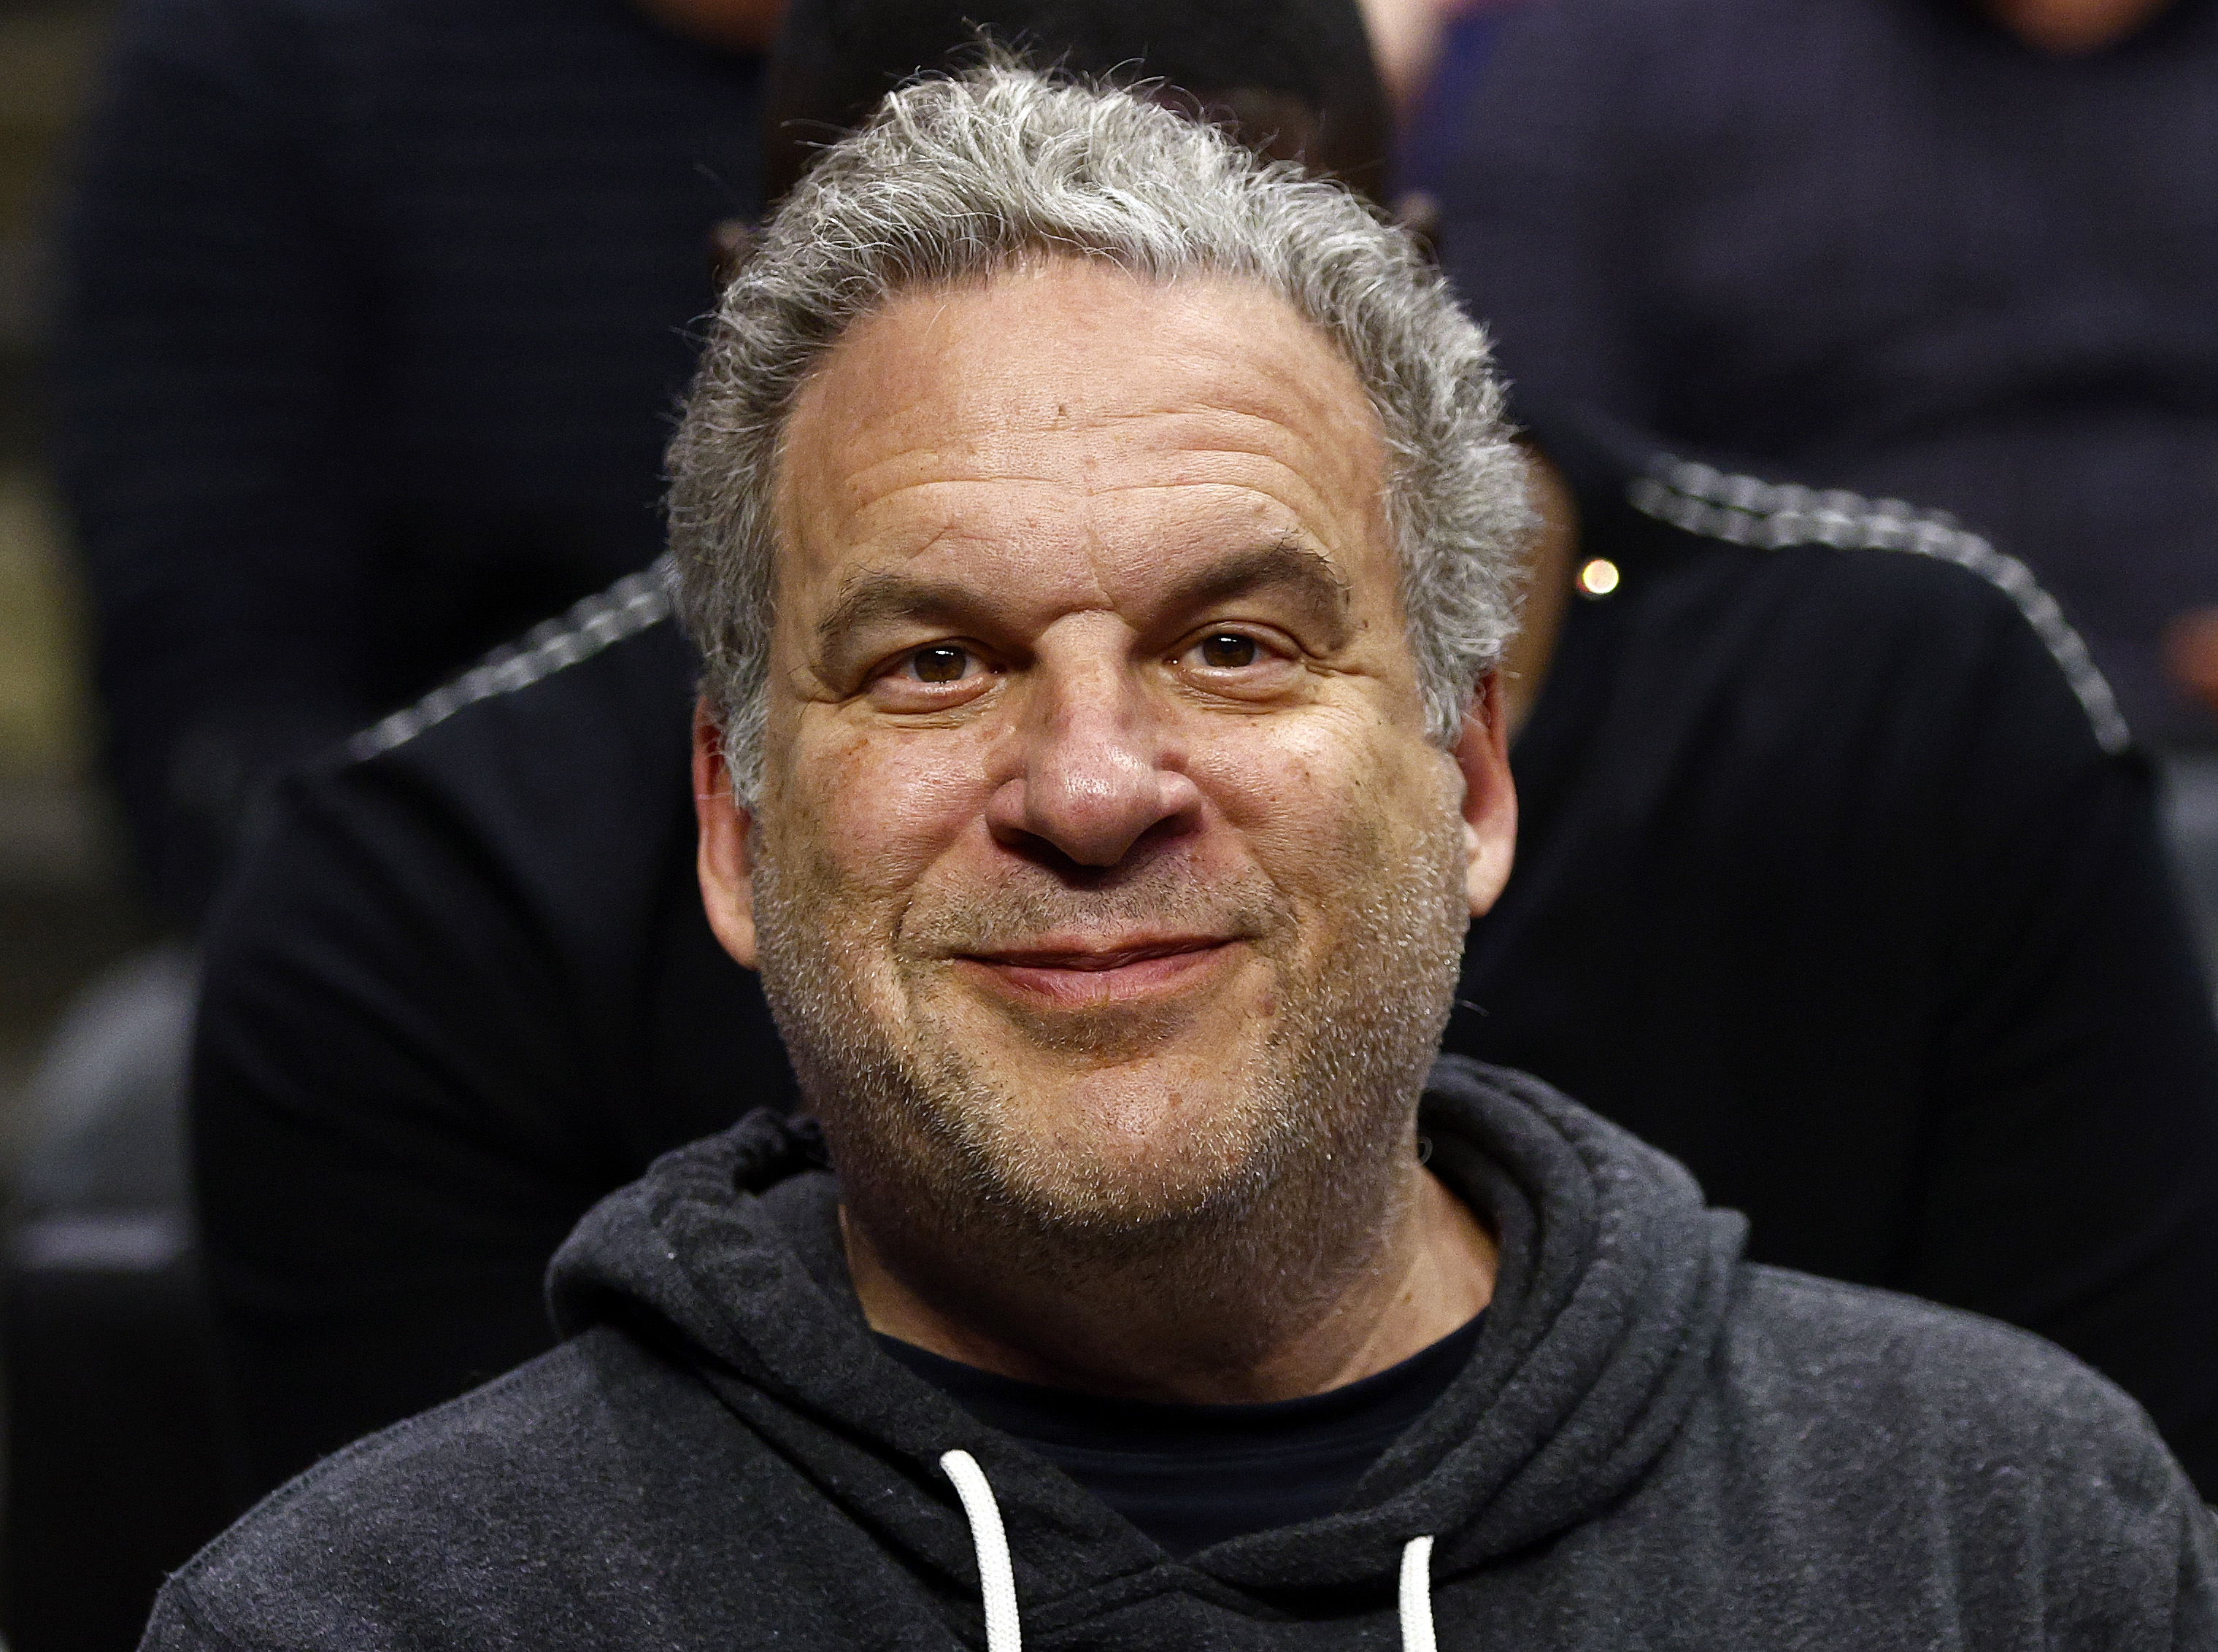 Jeff Garlin at Crypto.com Arena on March 25, 2022, in Los Angeles, California. | Source: Getty Images